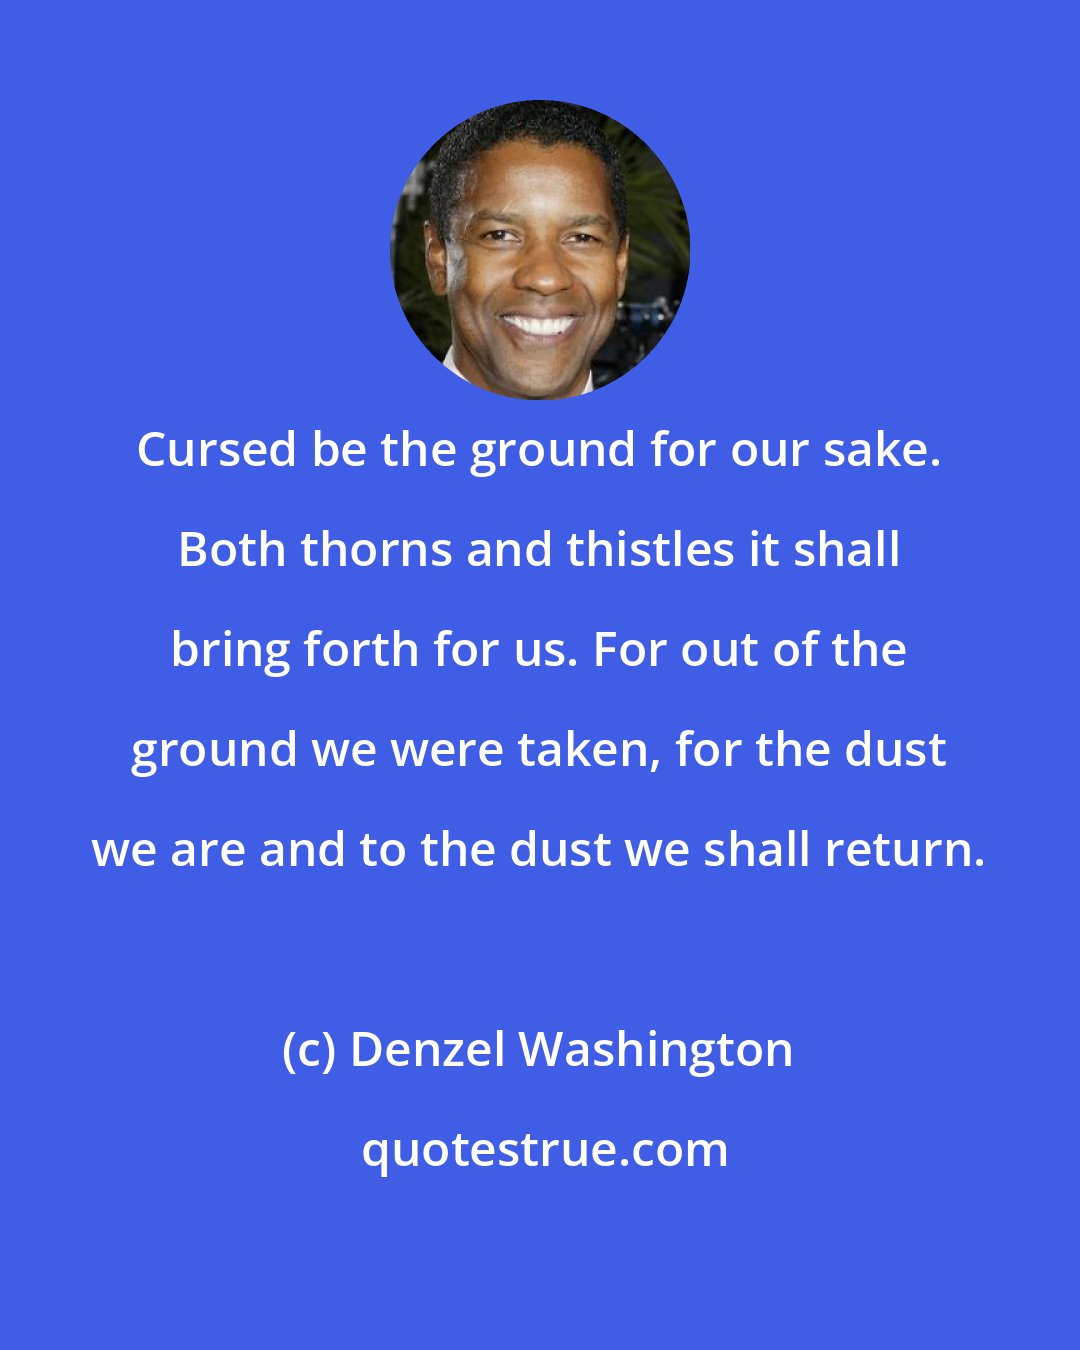 Denzel Washington: Cursed be the ground for our sake. Both thorns and thistles it shall bring forth for us. For out of the ground we were taken, for the dust we are and to the dust we shall return.